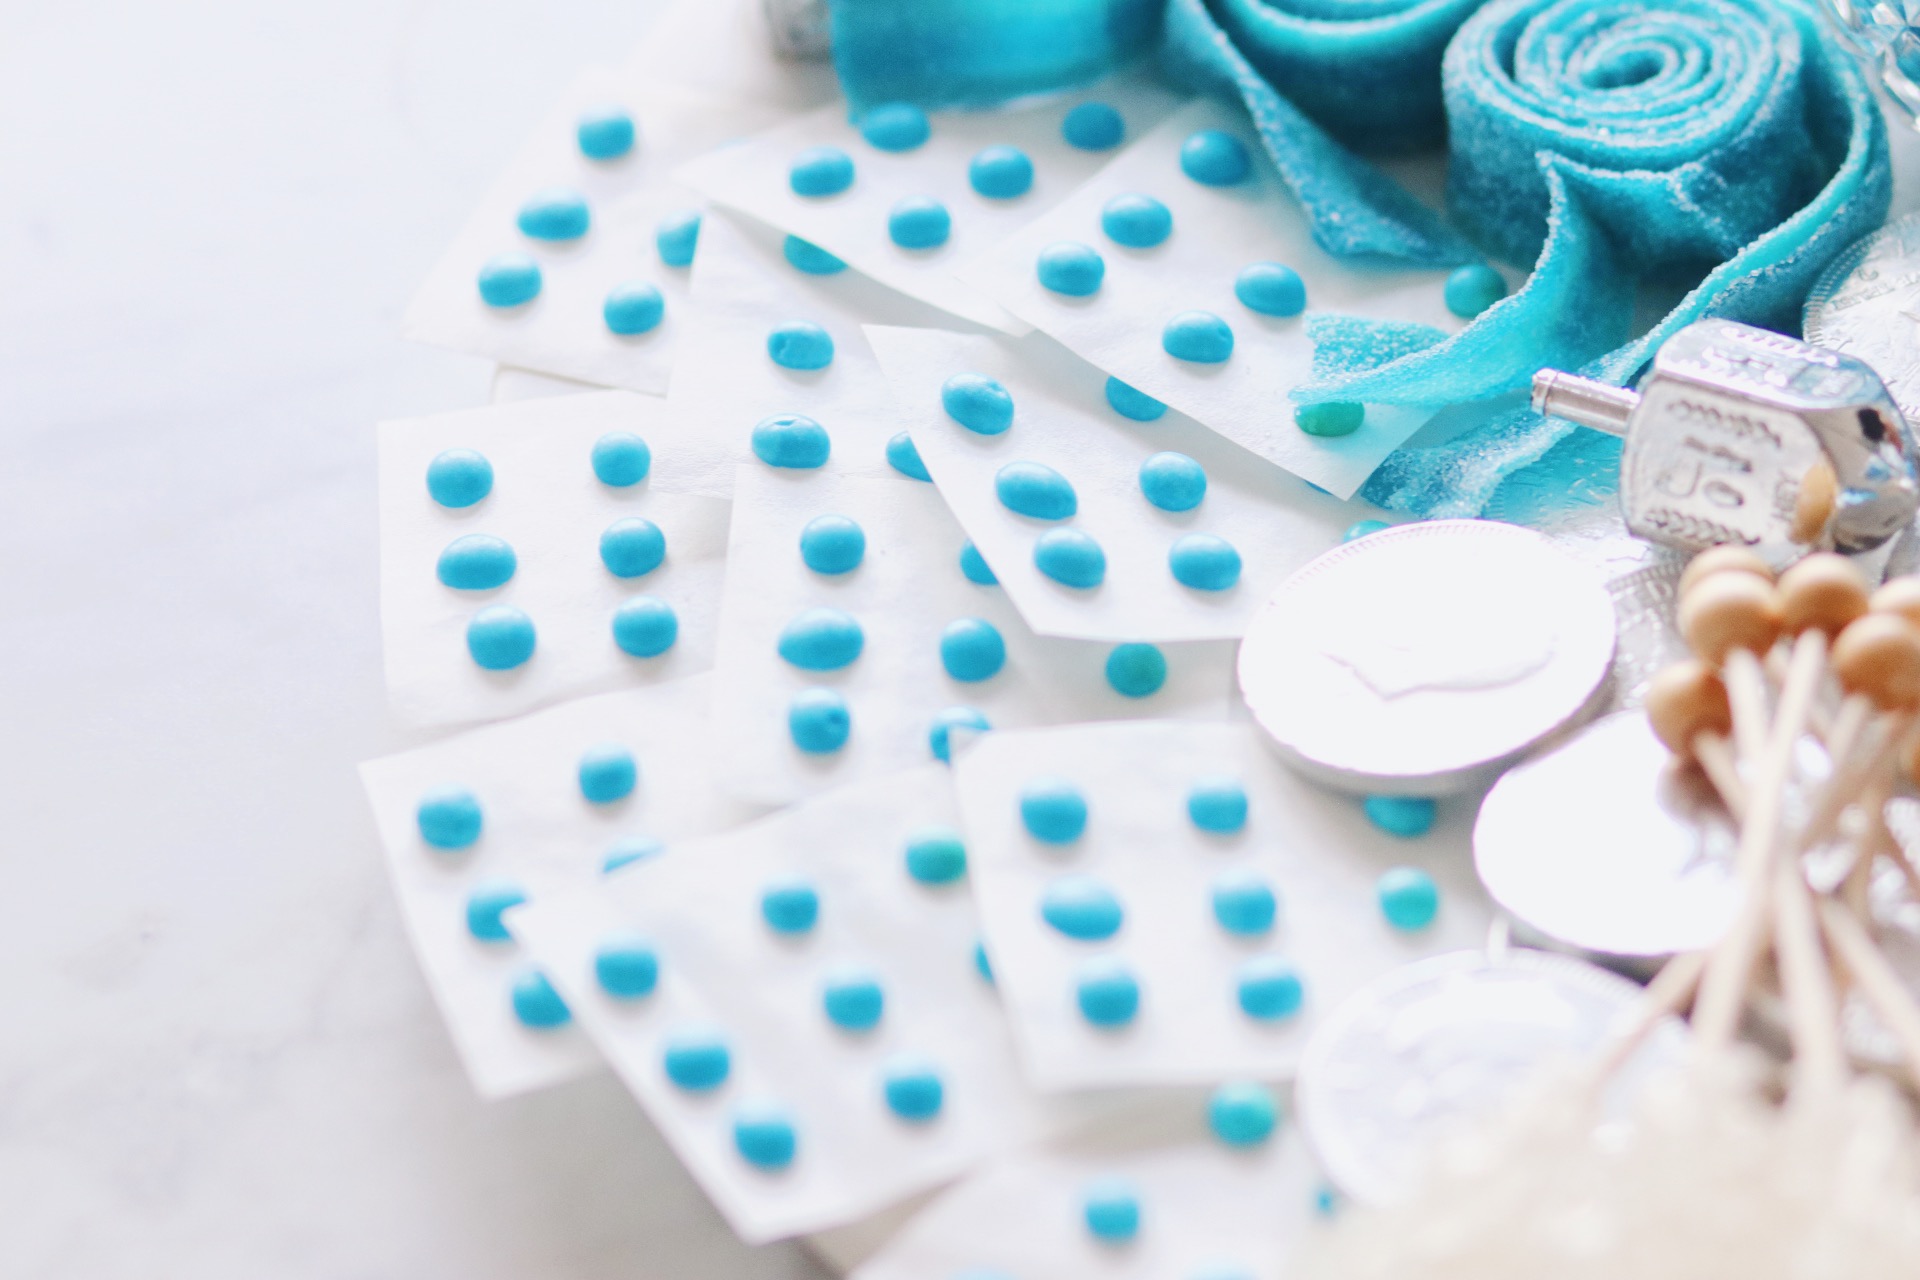 How to Put Together a Blue & White Candy Board for Hanukkah - Rebekah Lowin